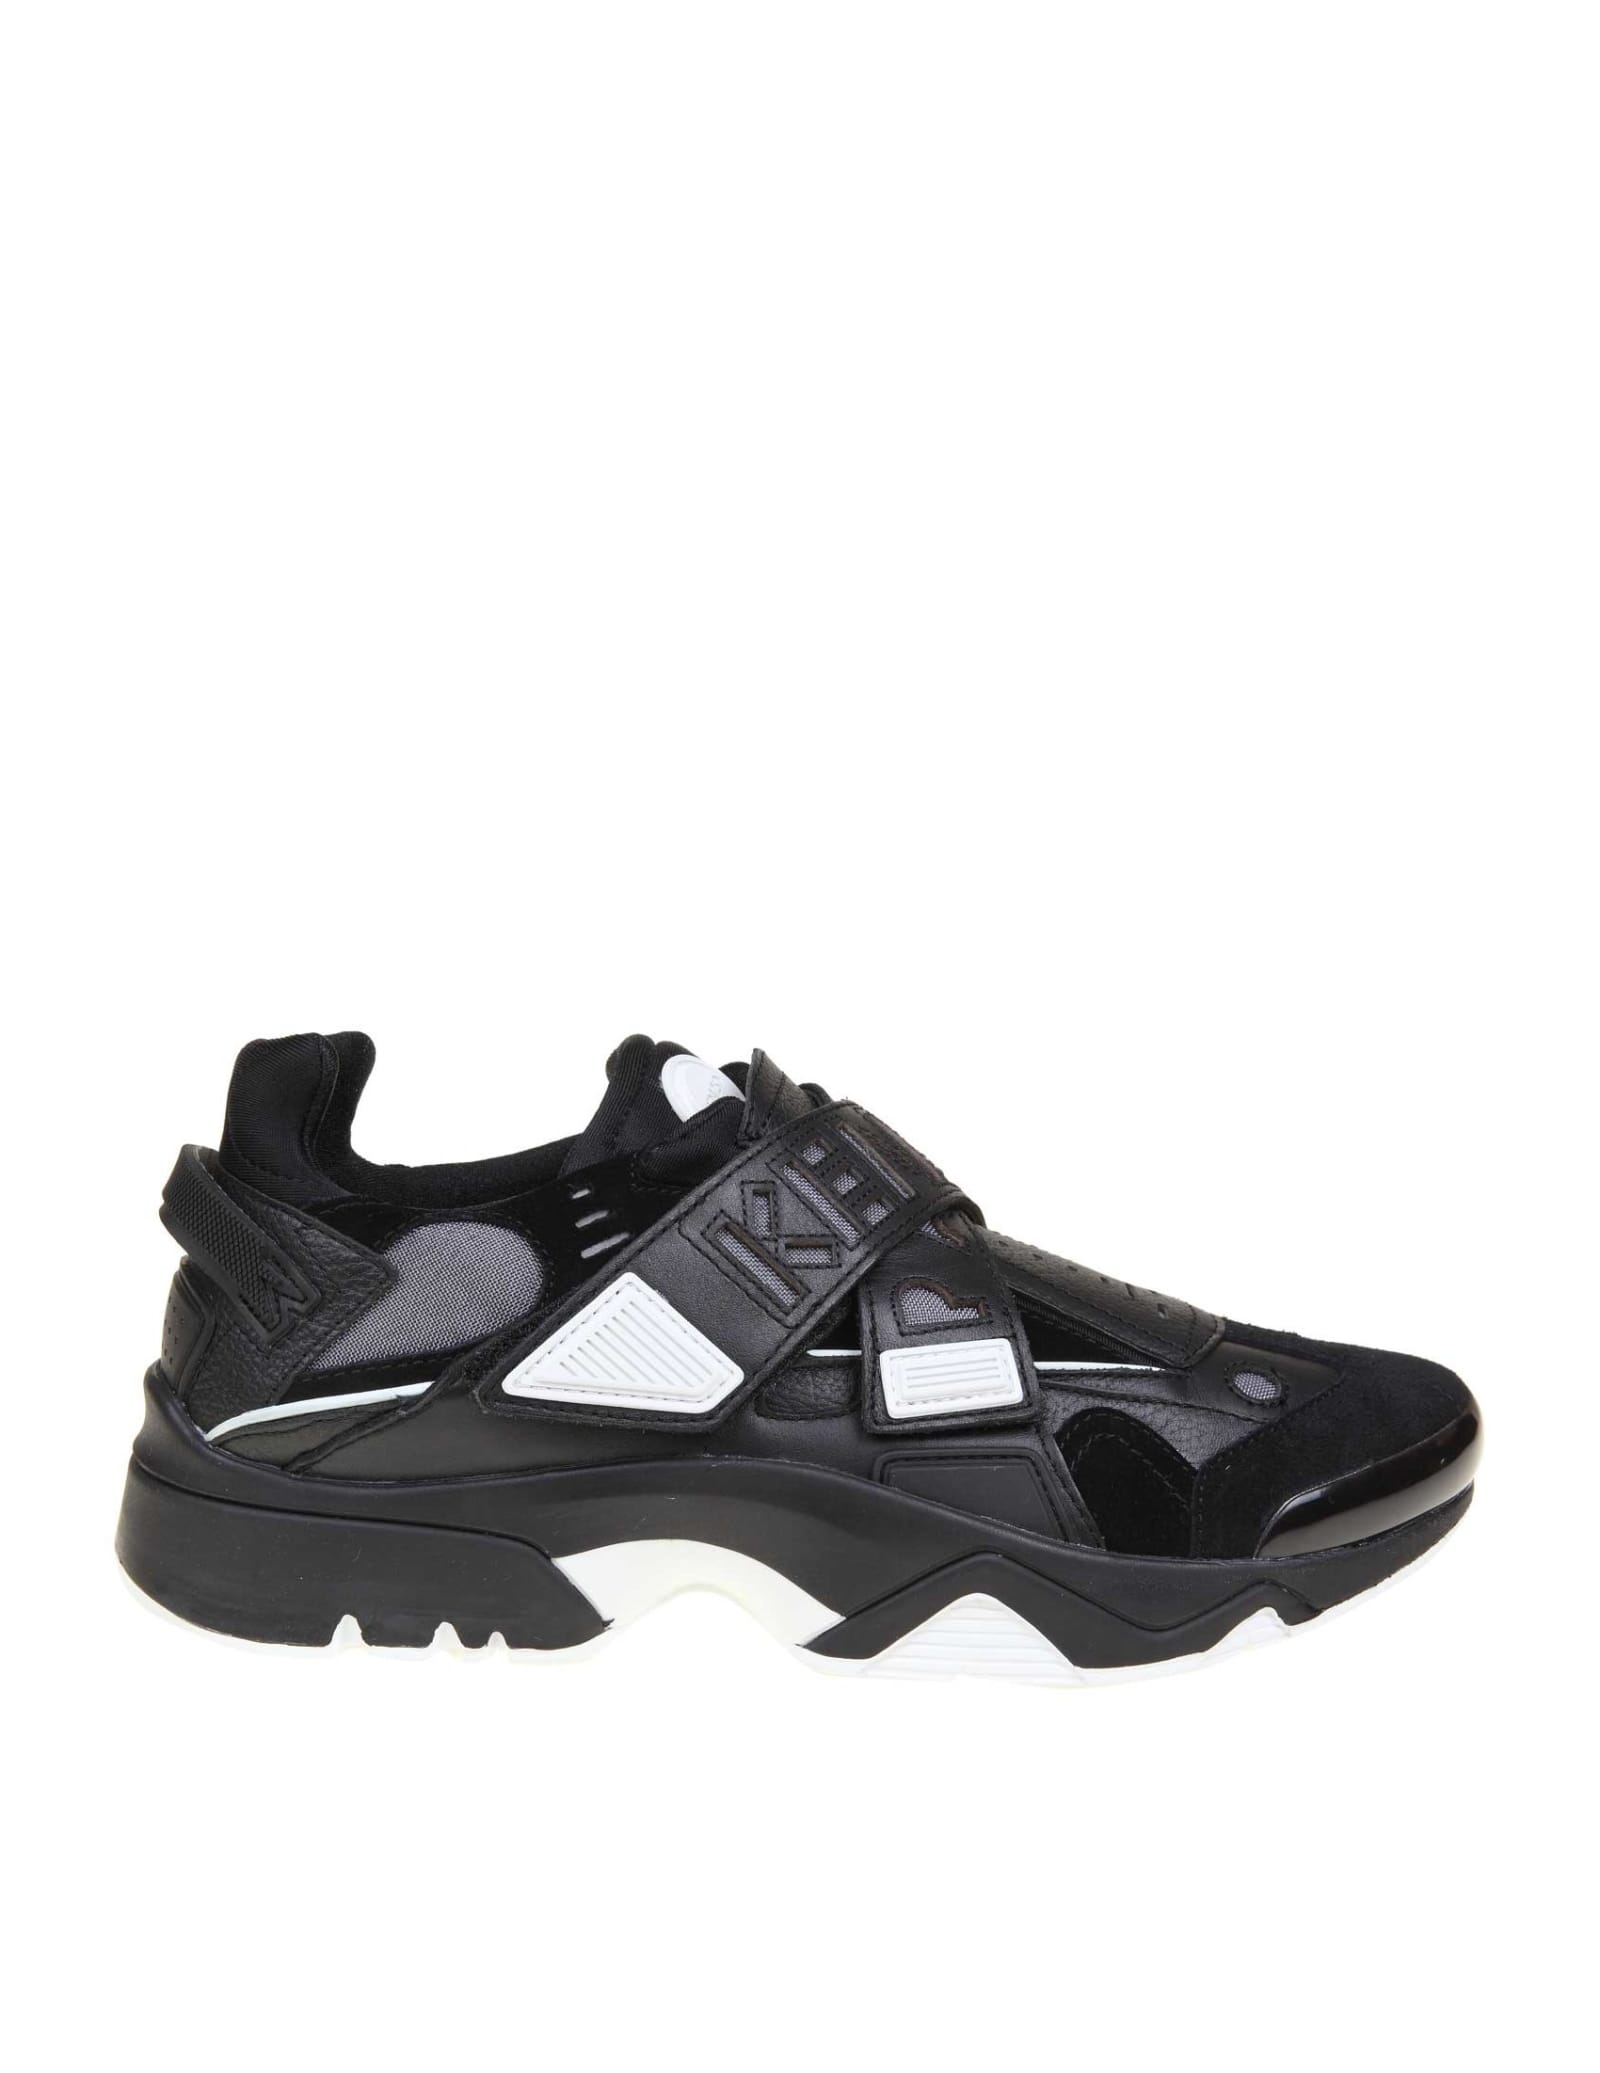 KENZO SONIC SCRATCH SNEAKERS IN LEATHER AND NEOPRENE,11218829